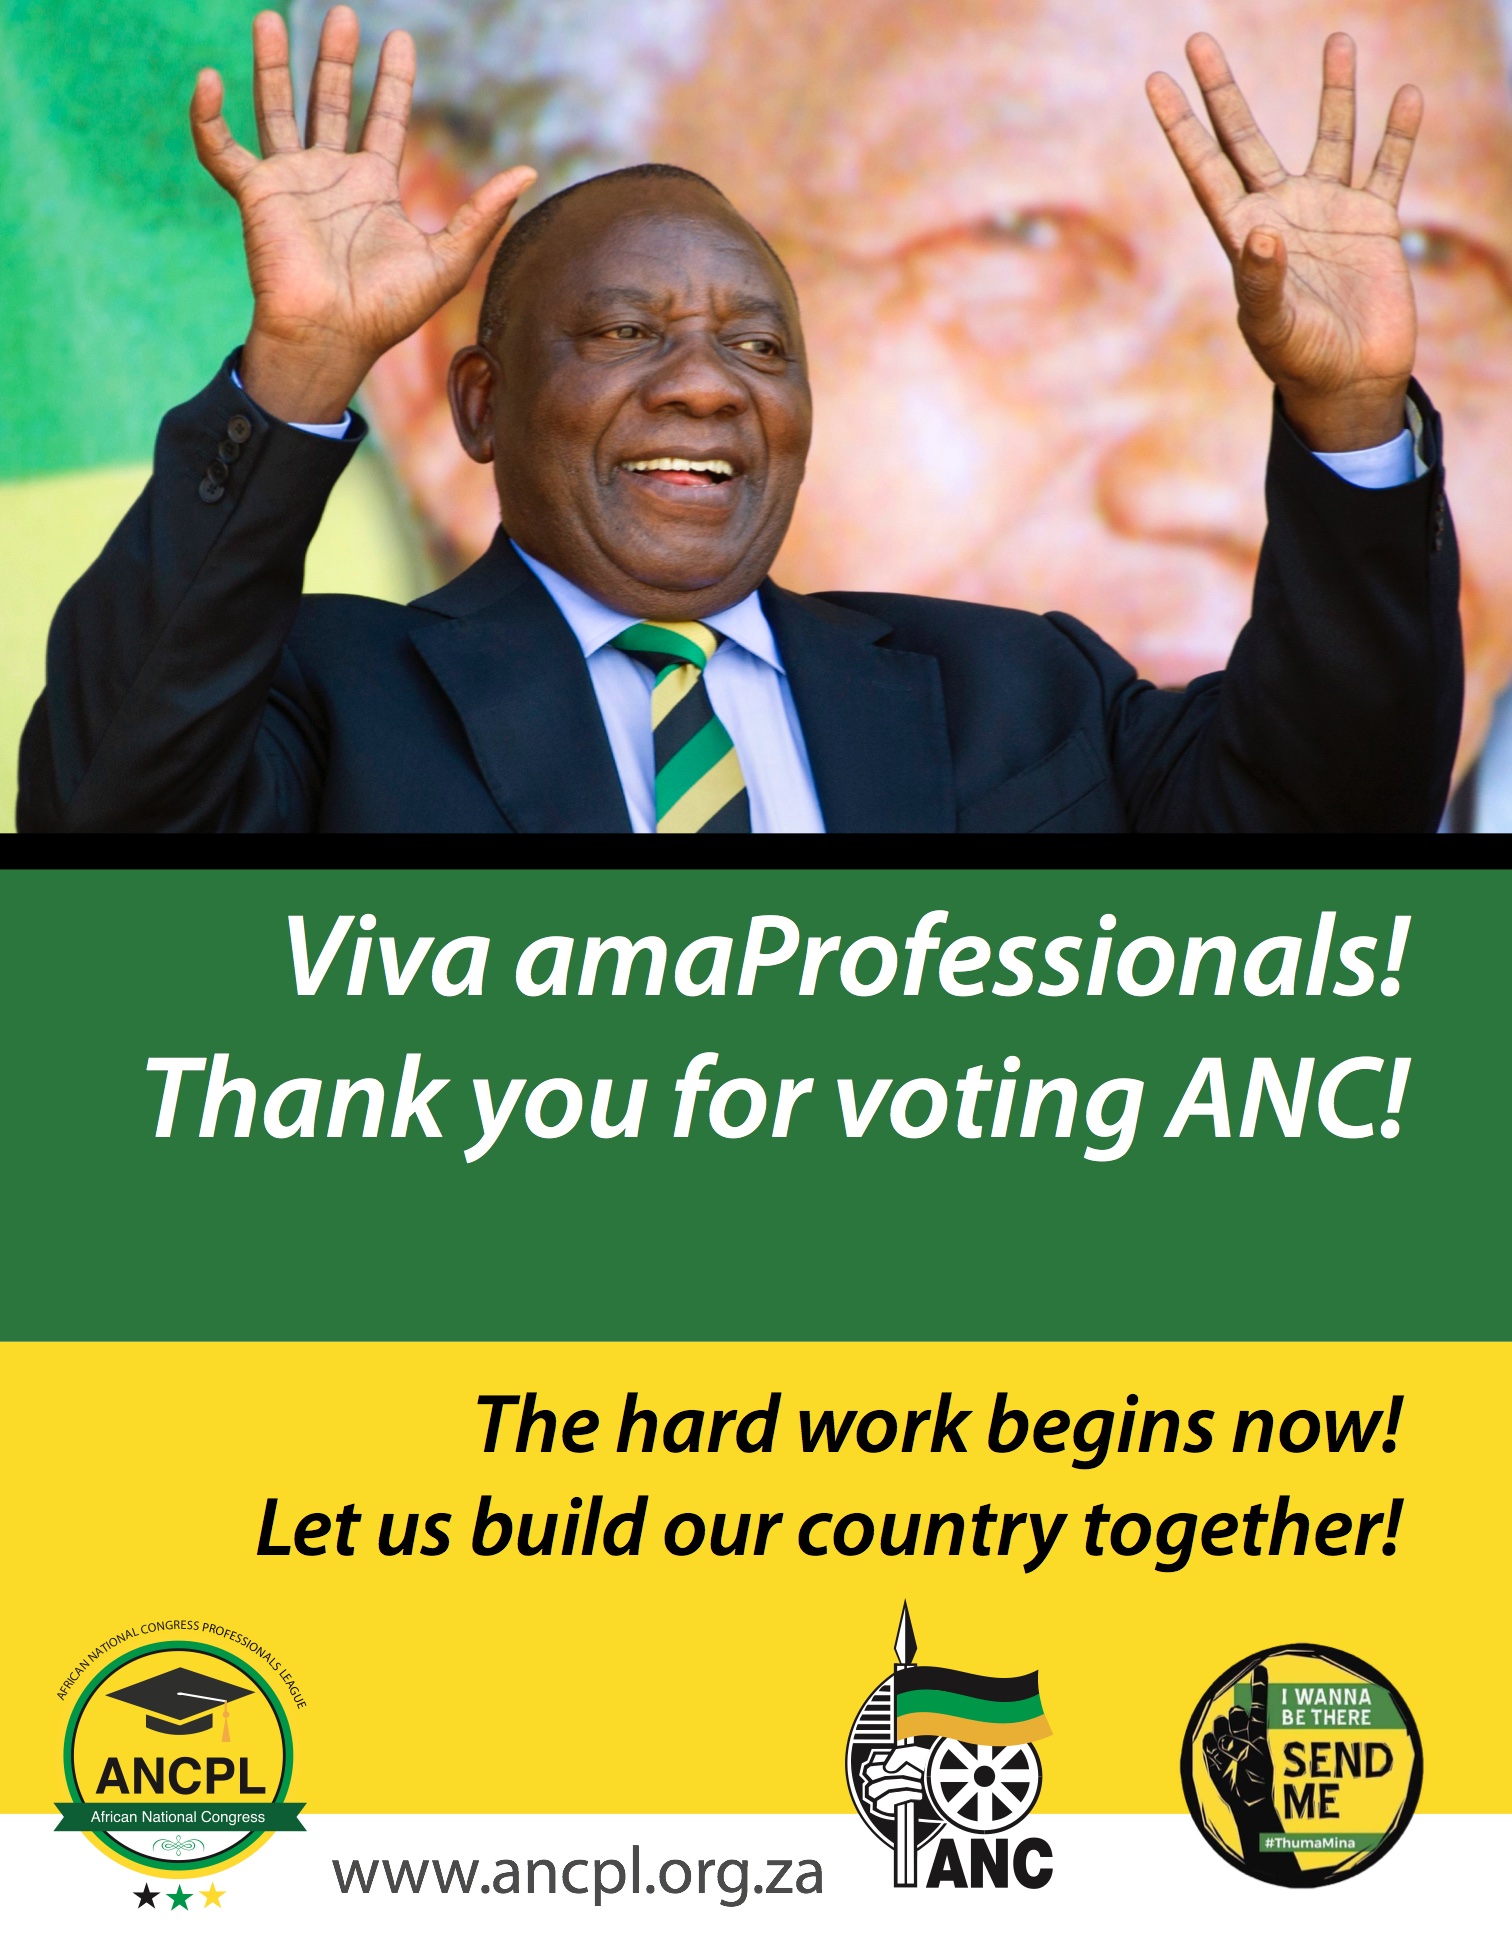 Viva amaProfessionals!  Thank you for voting ANC!